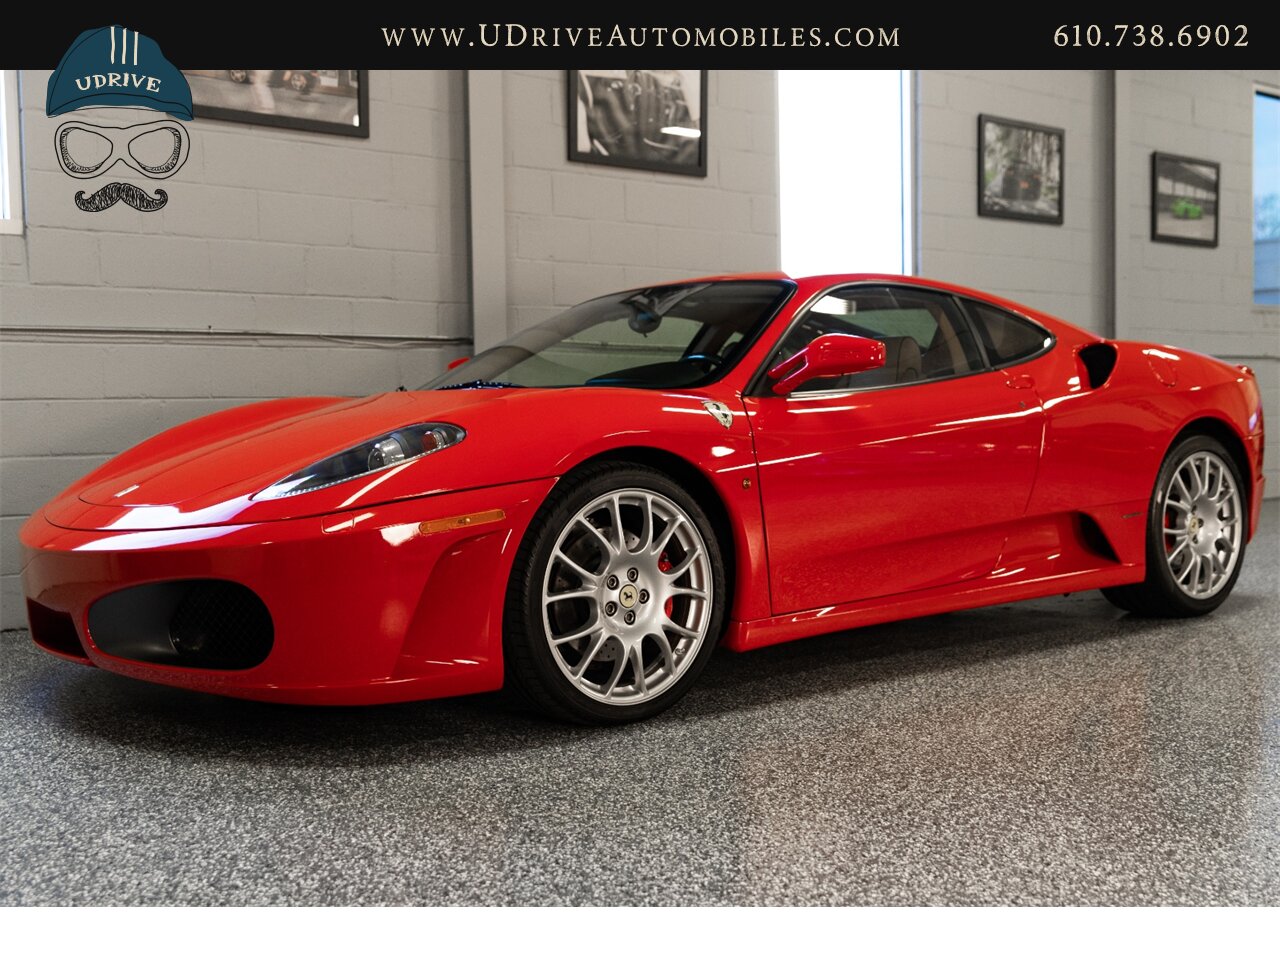 2006 Ferrari F430 F1 Coupe 1 Owner Daytona Seats Challenge Whls  Carbon Fibre Upper Lower Zone Shields Piping Serv Hist $208k MSRP - Photo 7 - West Chester, PA 19382